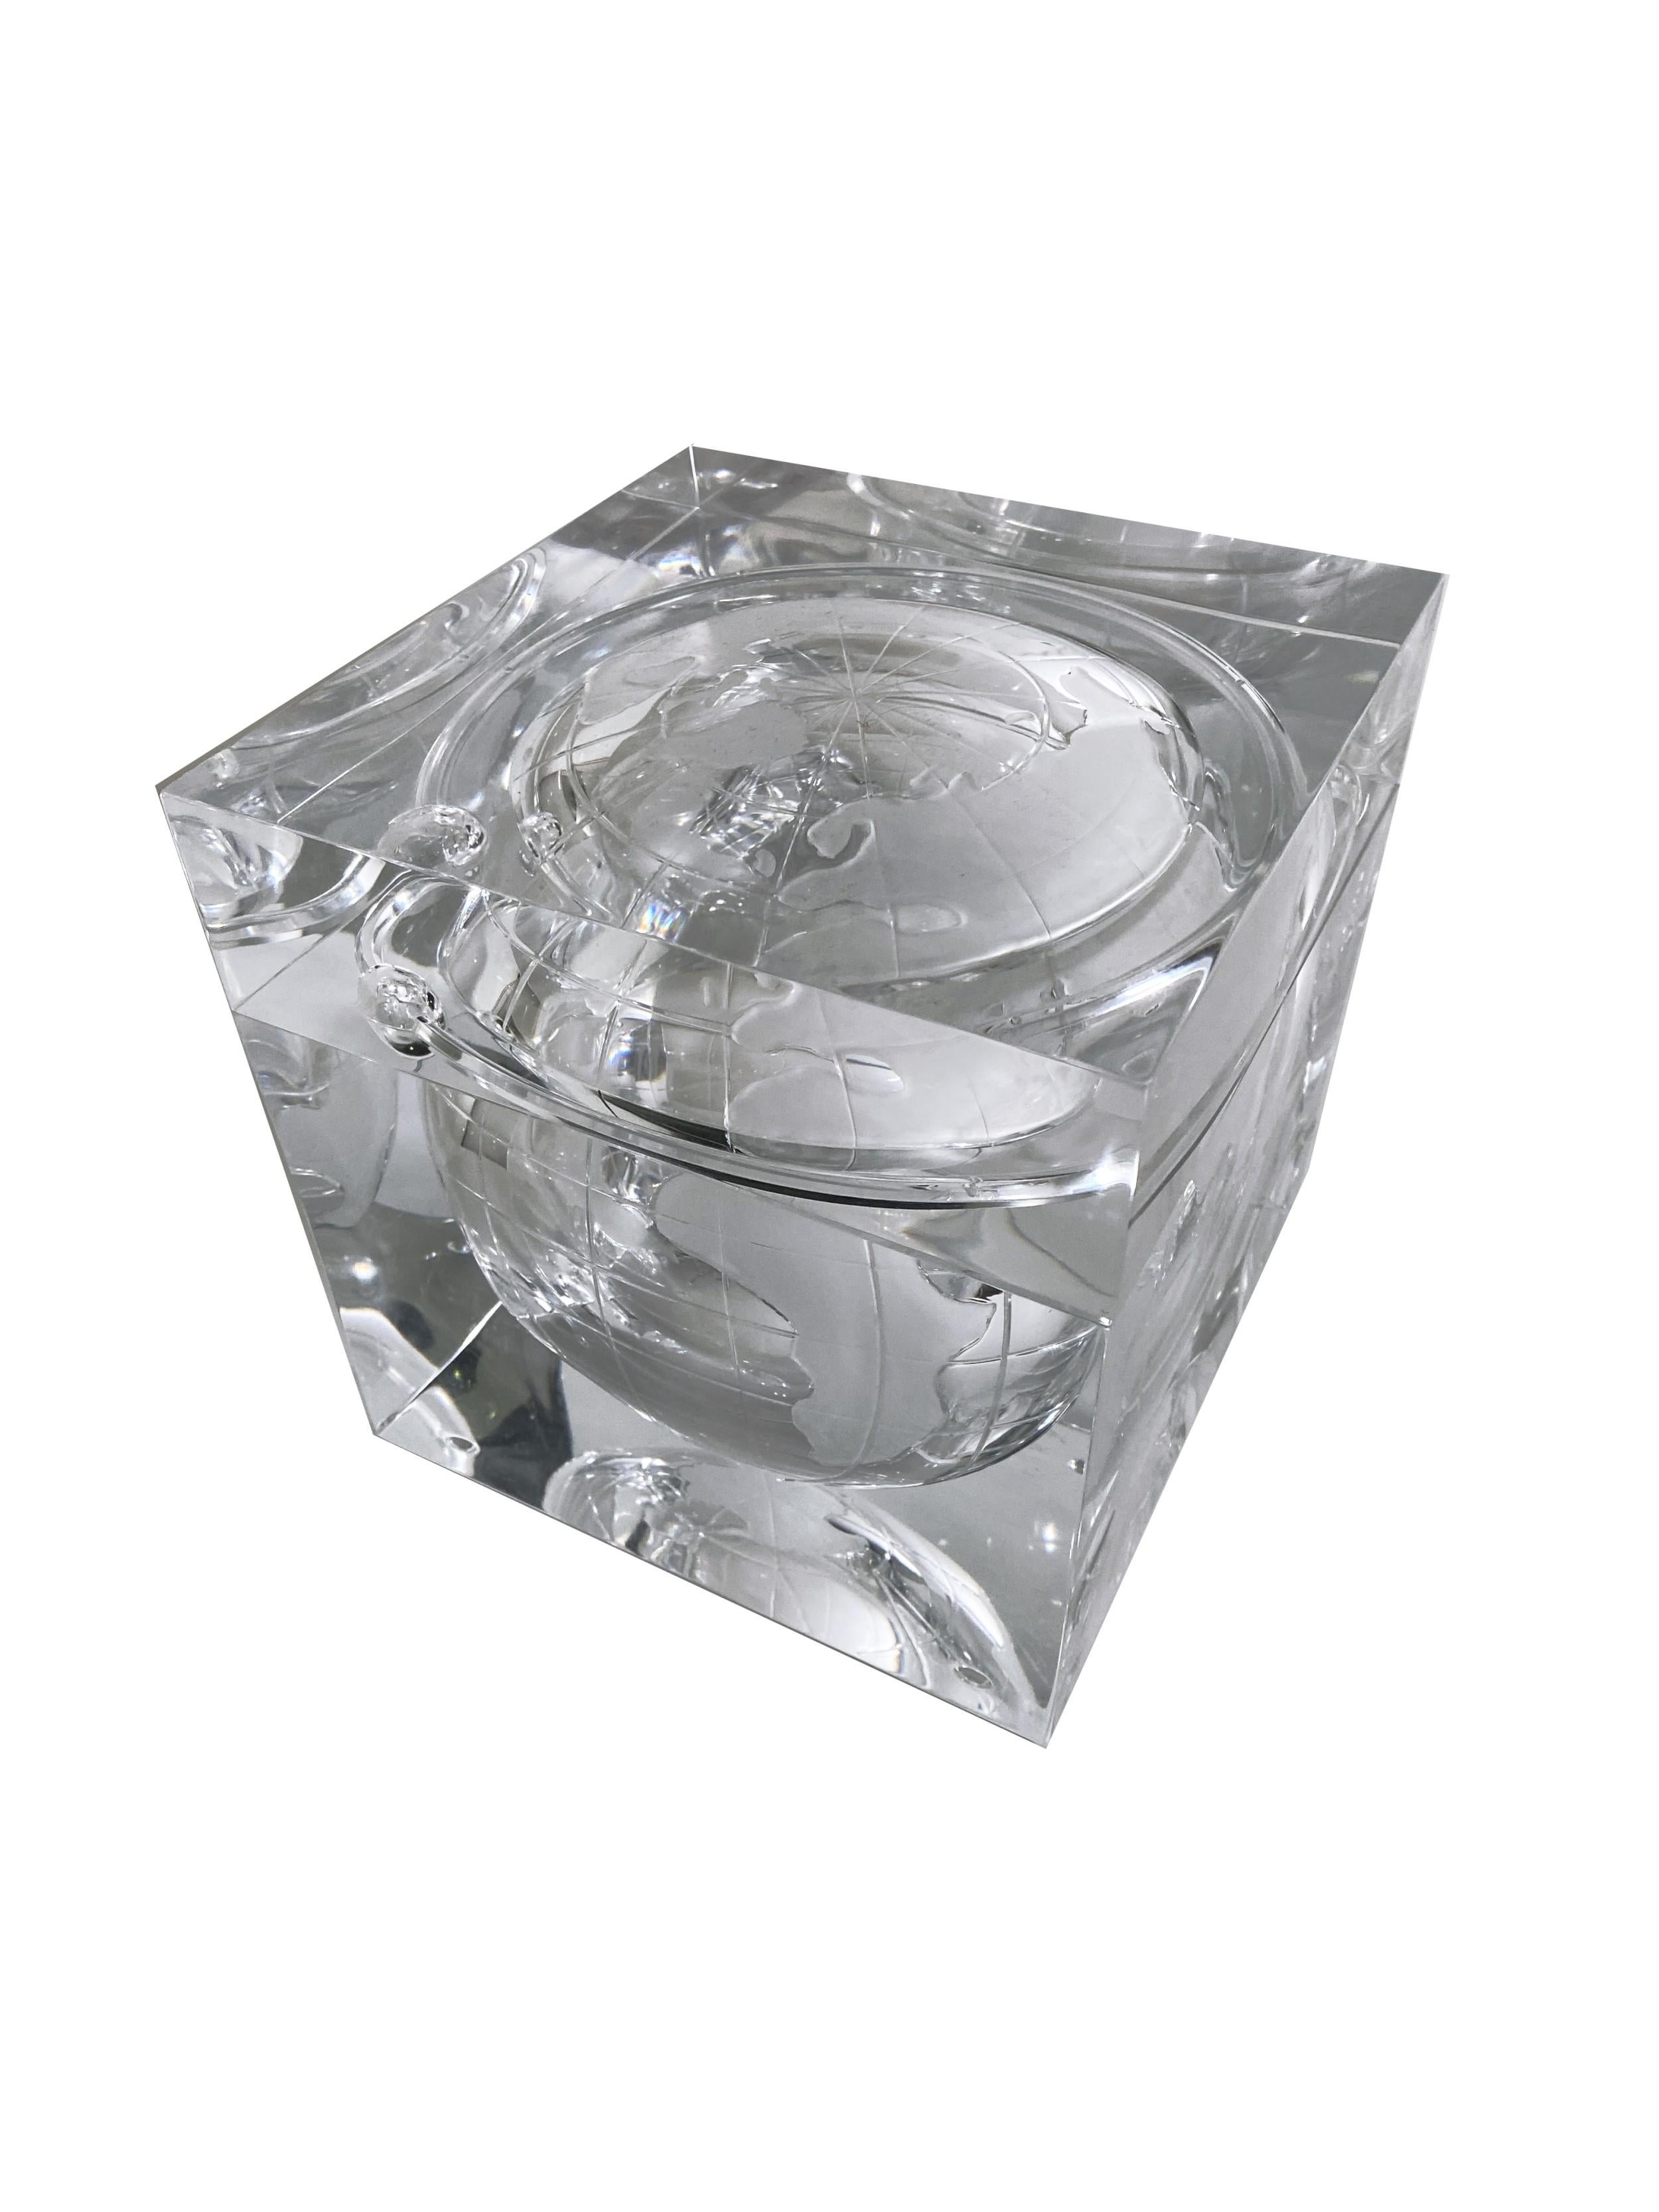 Mid-Century Modern (1960s-1970s) lucite ice bucket in cube form with an etched rounded interior design of the globe.(2 sections) (by ALESSANDRO ABRIZZI)
